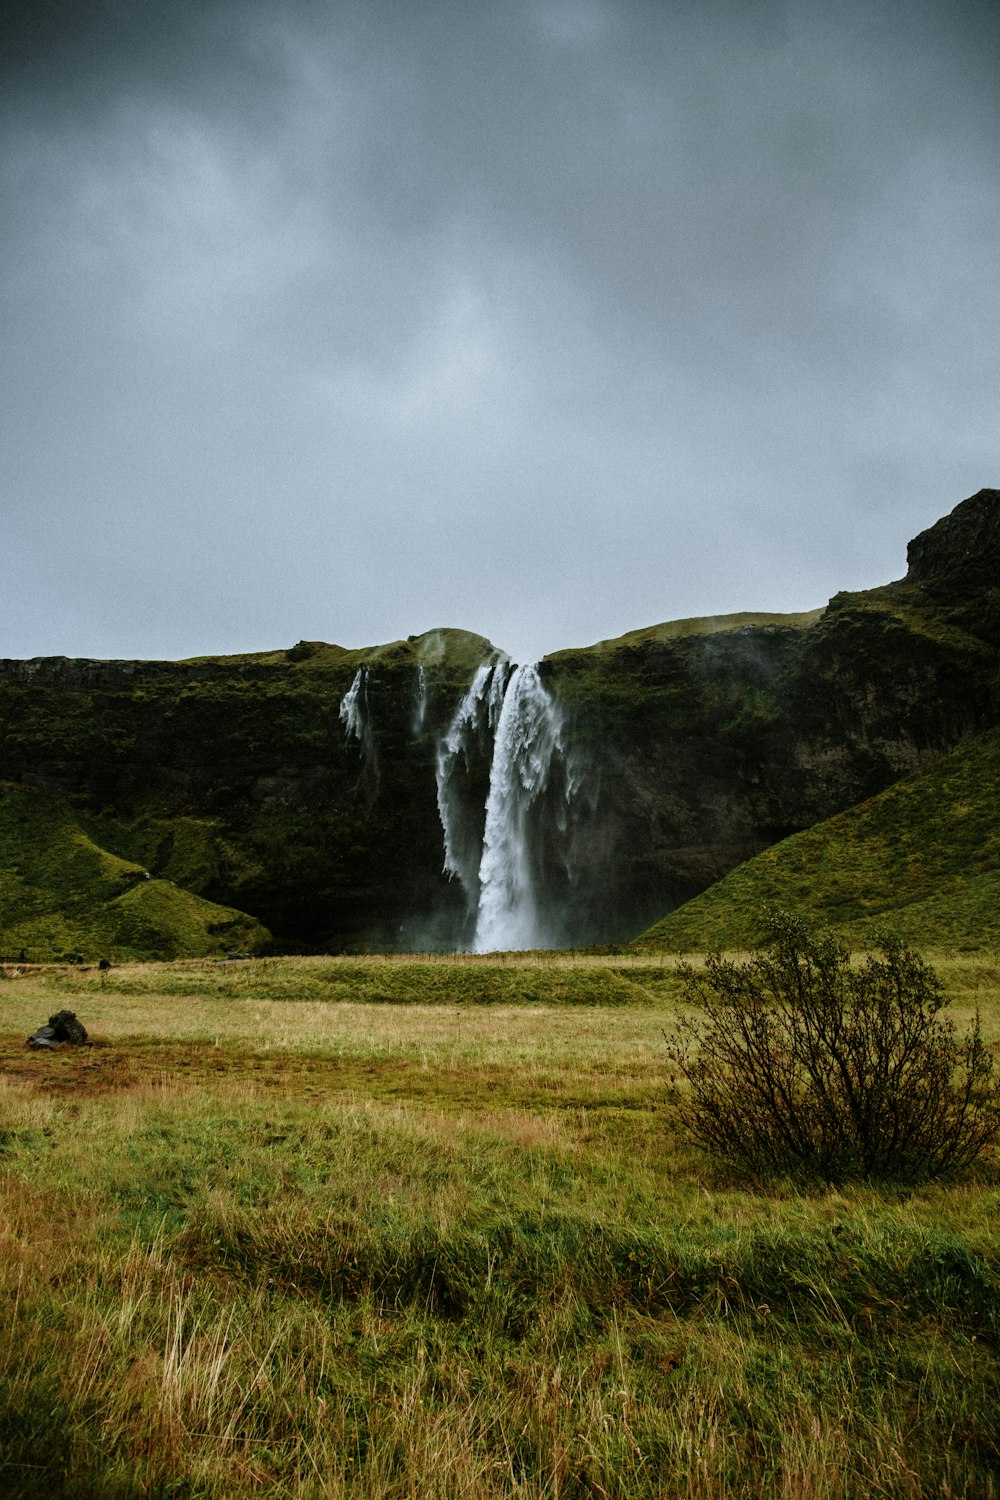 a large waterfall in the middle of a grassy field